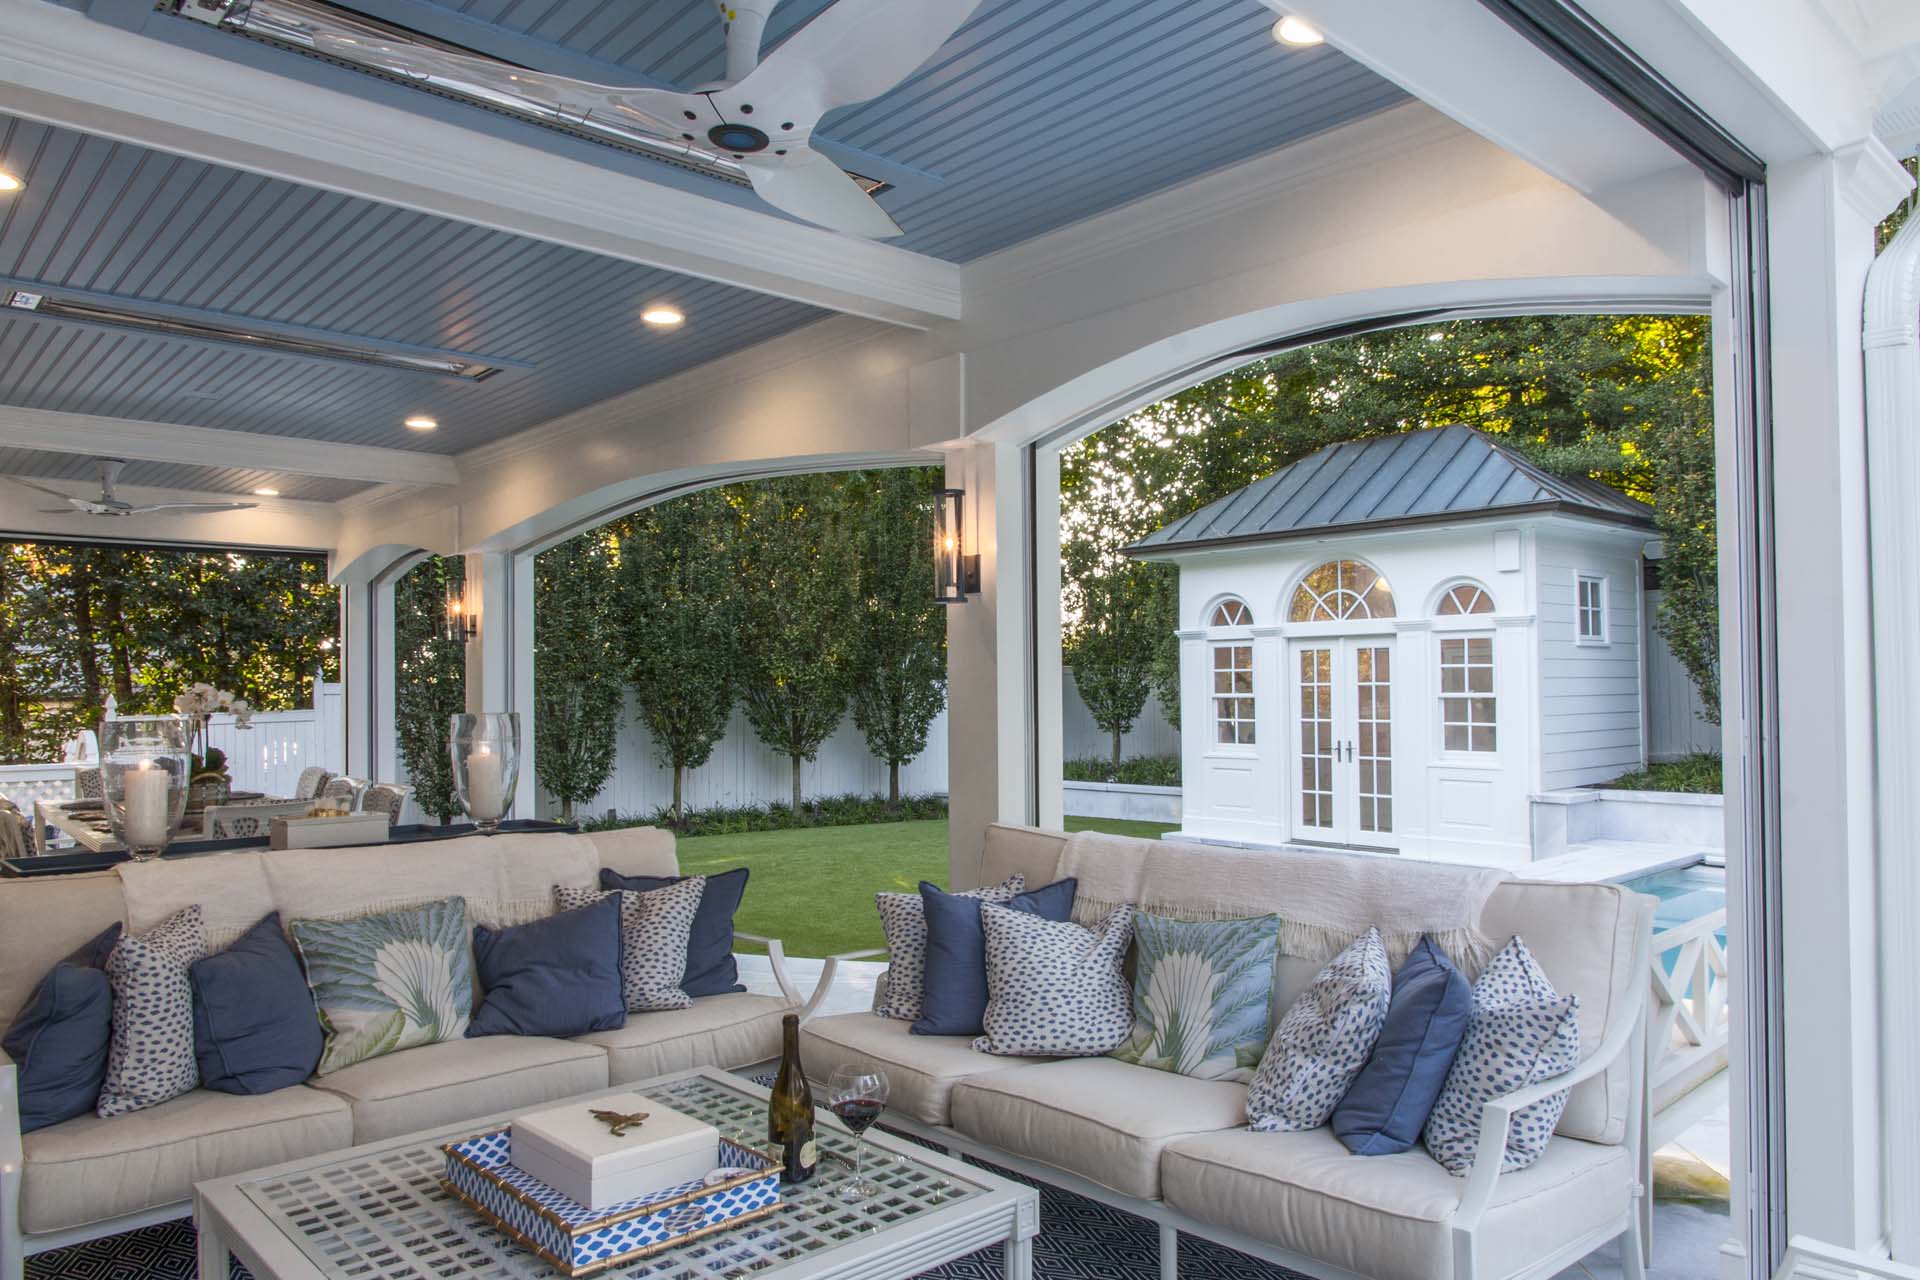 Patio with lighting and outdoor patio furniture with blue accent pillows